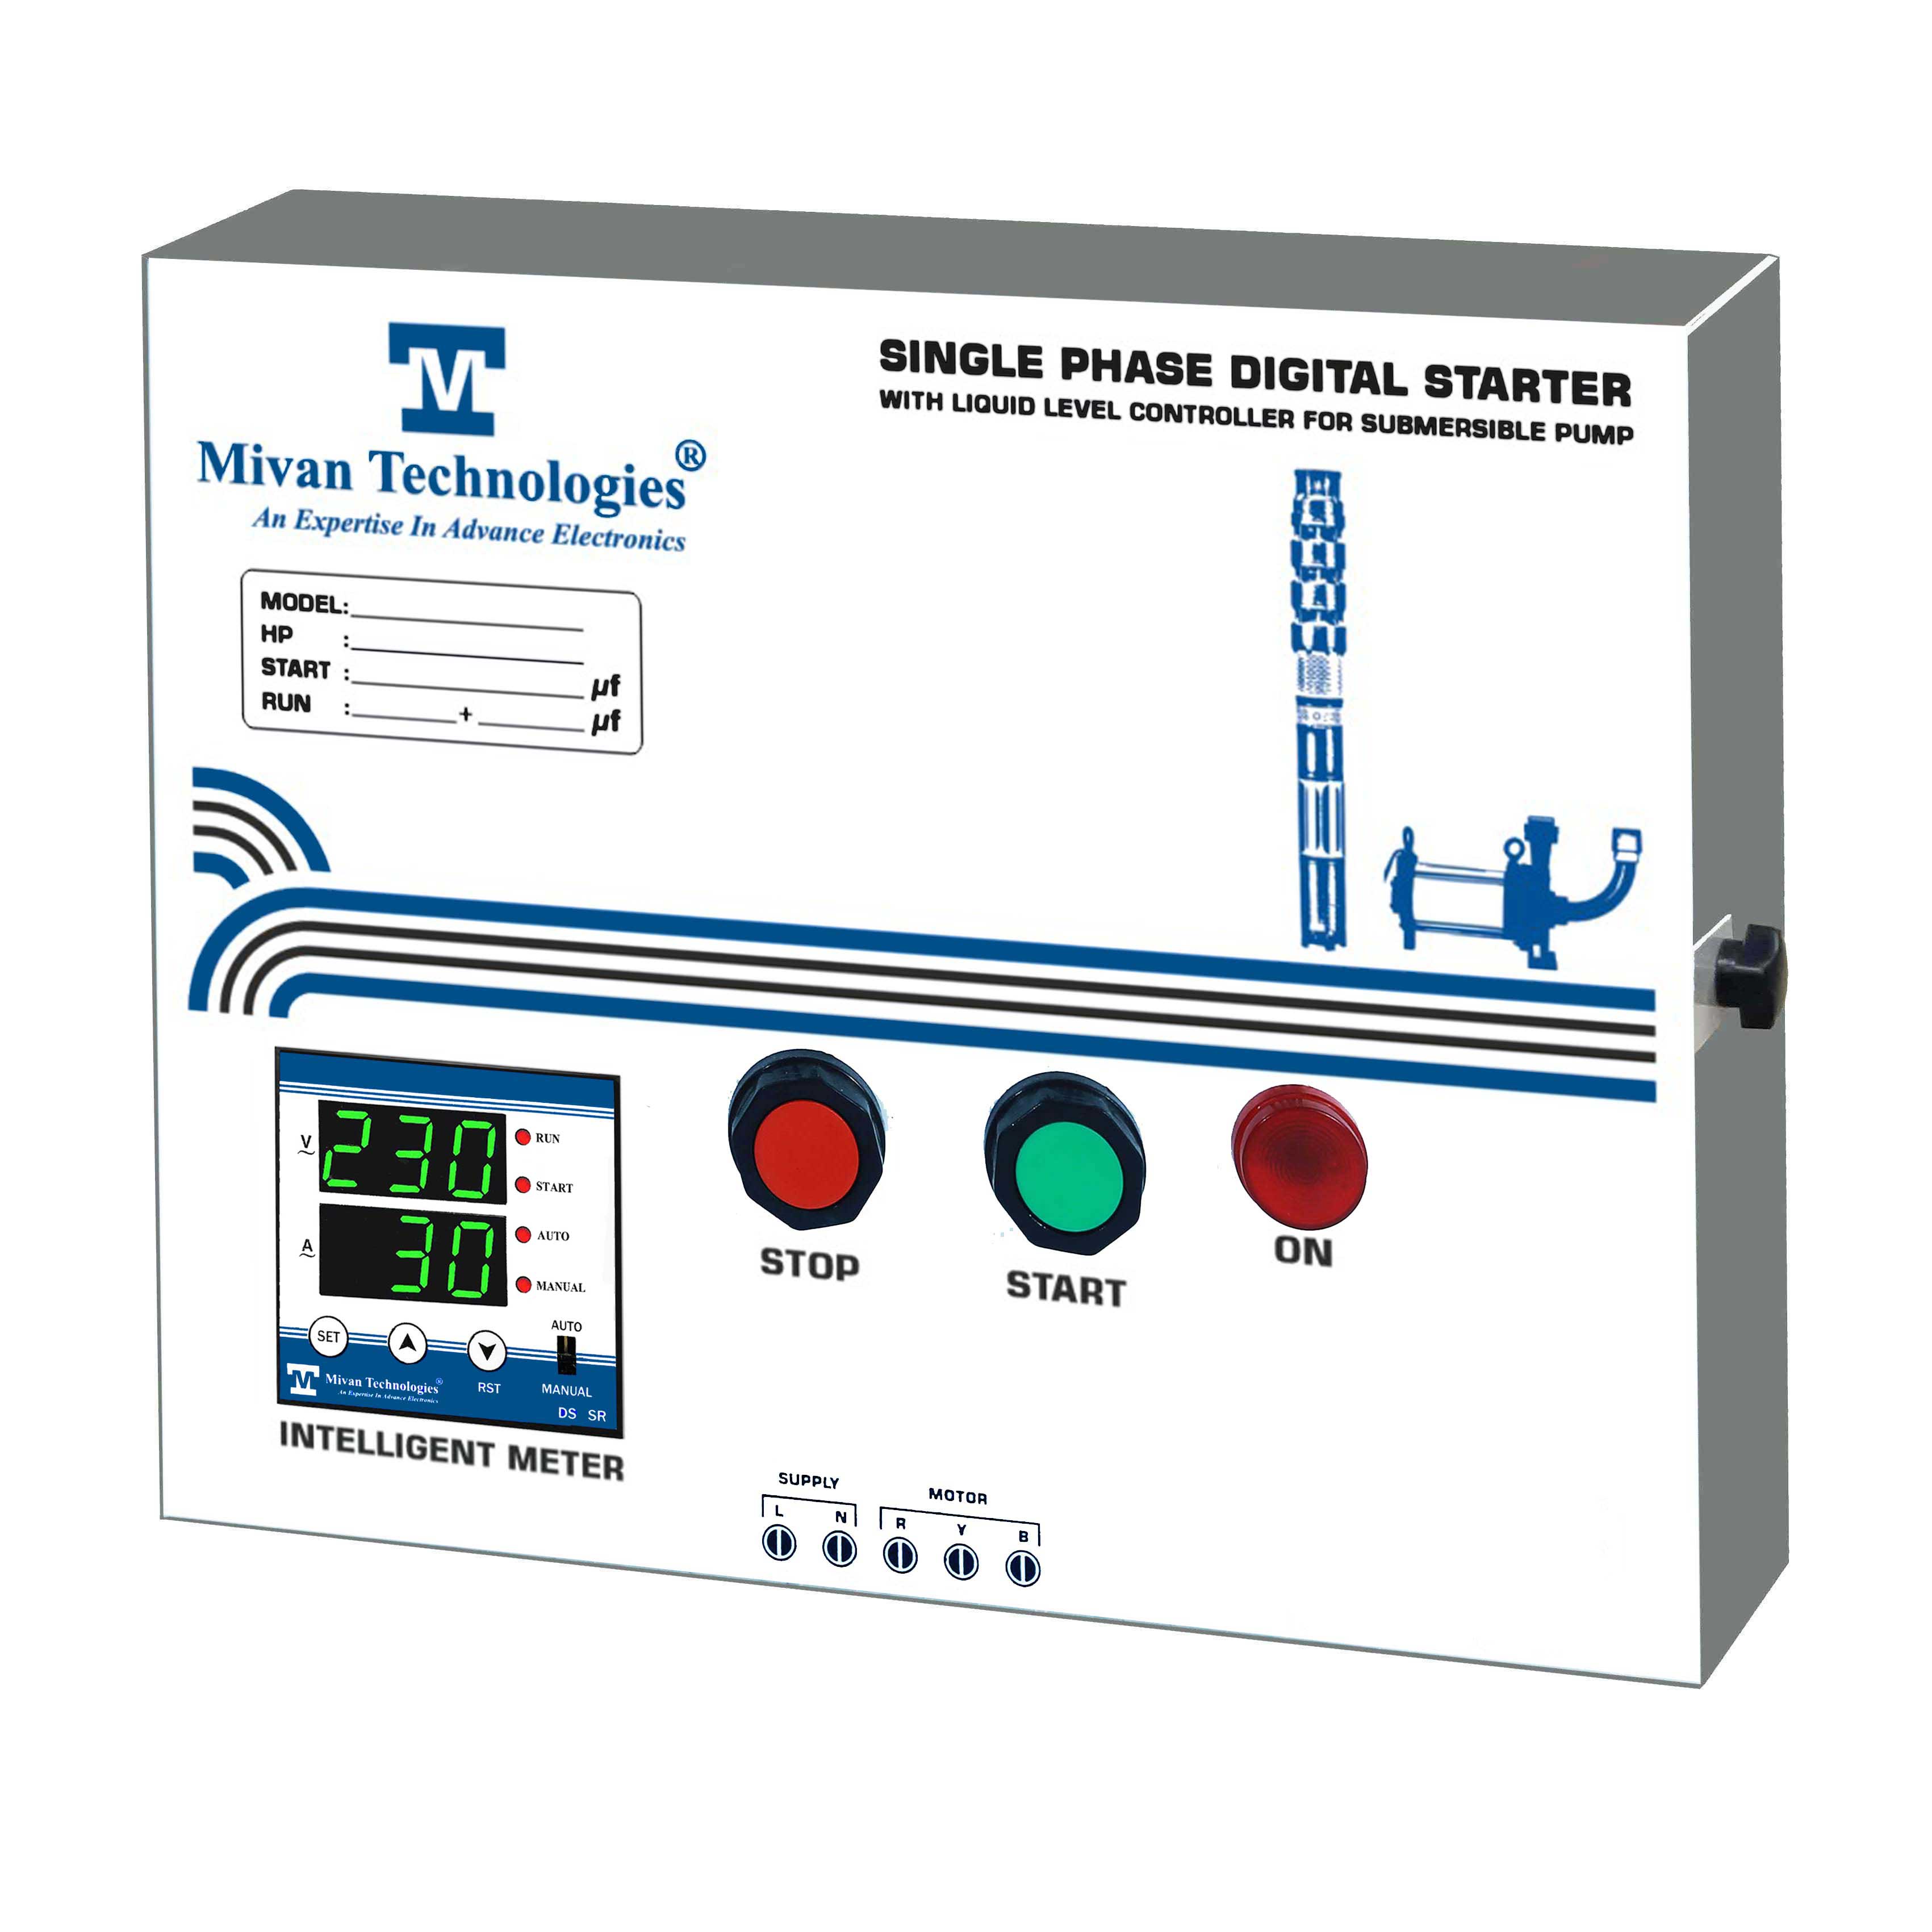 DS SR 96 single phase Digital motor starter panel with volt and amp meter with HV LV OL DRY RUN Protection with CYCLIC timer 2 contactor suitable FOR 1 HP